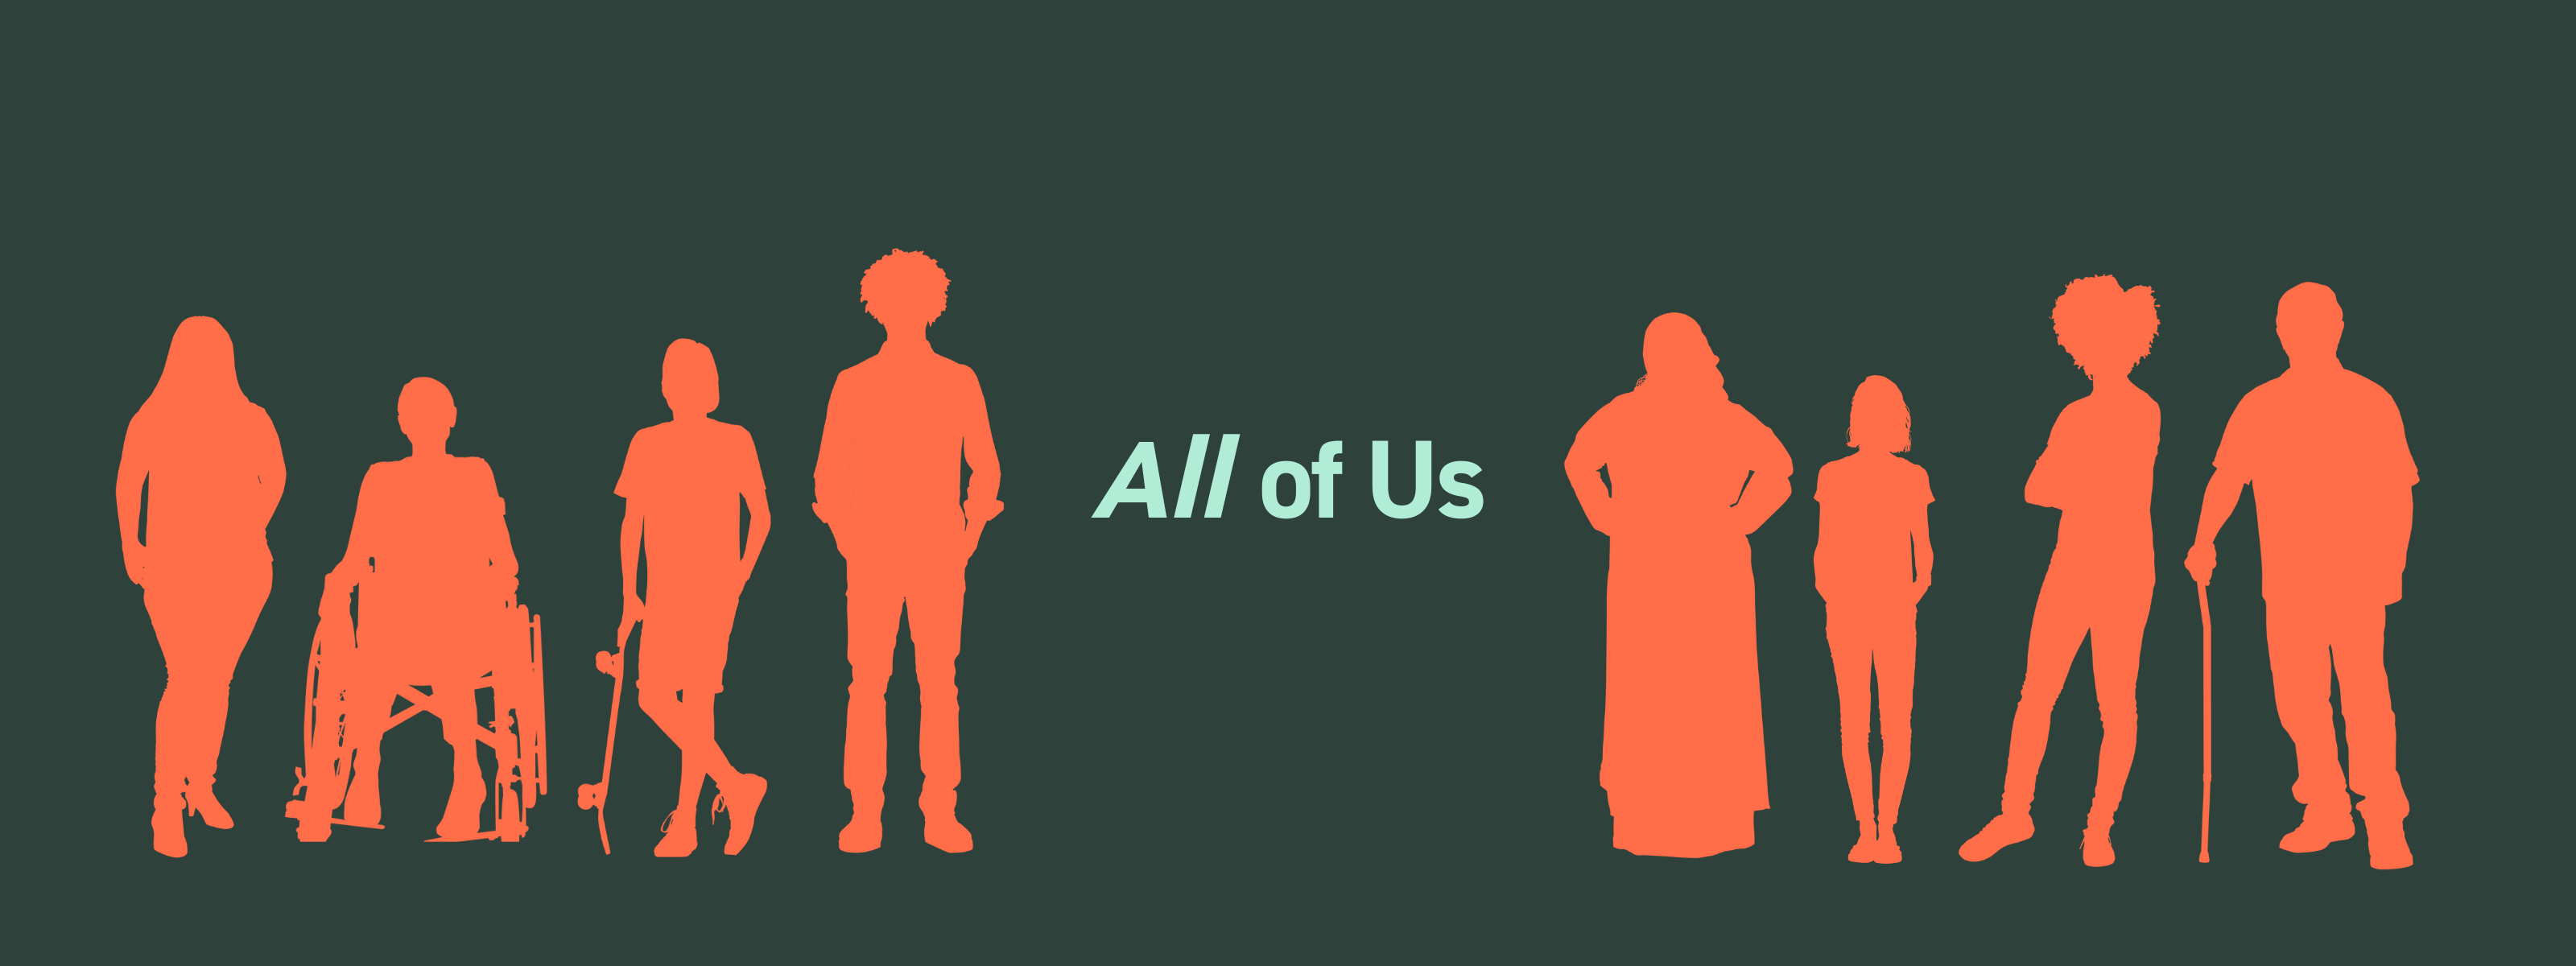 A digital graphic of eight, red silhouette figures of different hair styles, sizes, and abilities standing in a line against a gray background. In between them, in mint blue letters, reads, "All of us."